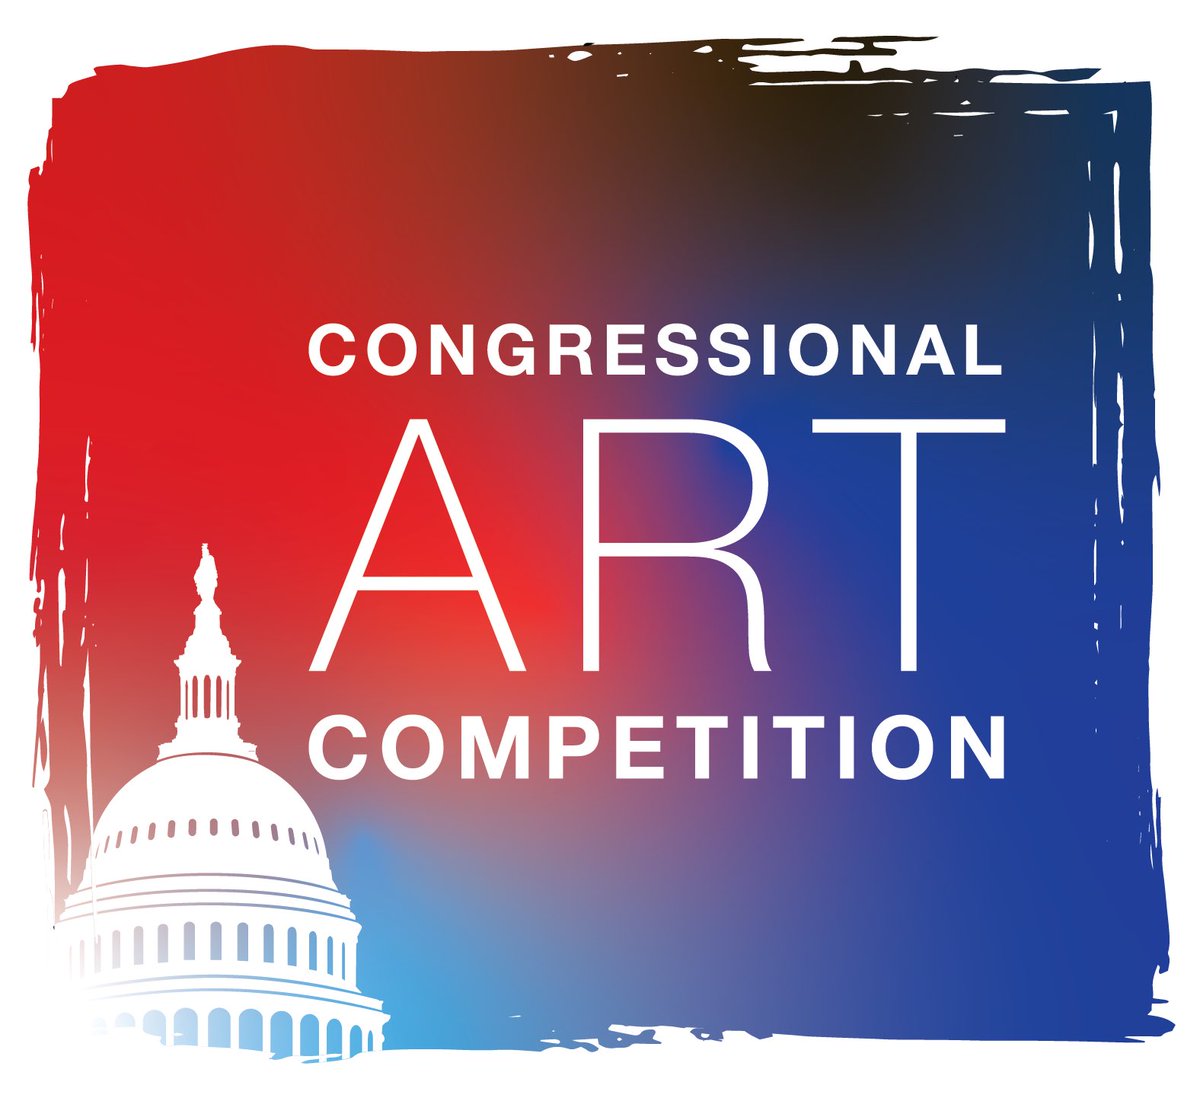 Submissions for the 2024 Congressional Art Competition open in 30 minutes! Artwork must be submitted at the Scottsdale Artists’ School, located at 3720 N Marshall Way, Scottsdale, AZ 85251, between 3 p.m. - 5 p.m. I’m looking forward to the creativity of young artists in #AZ01!